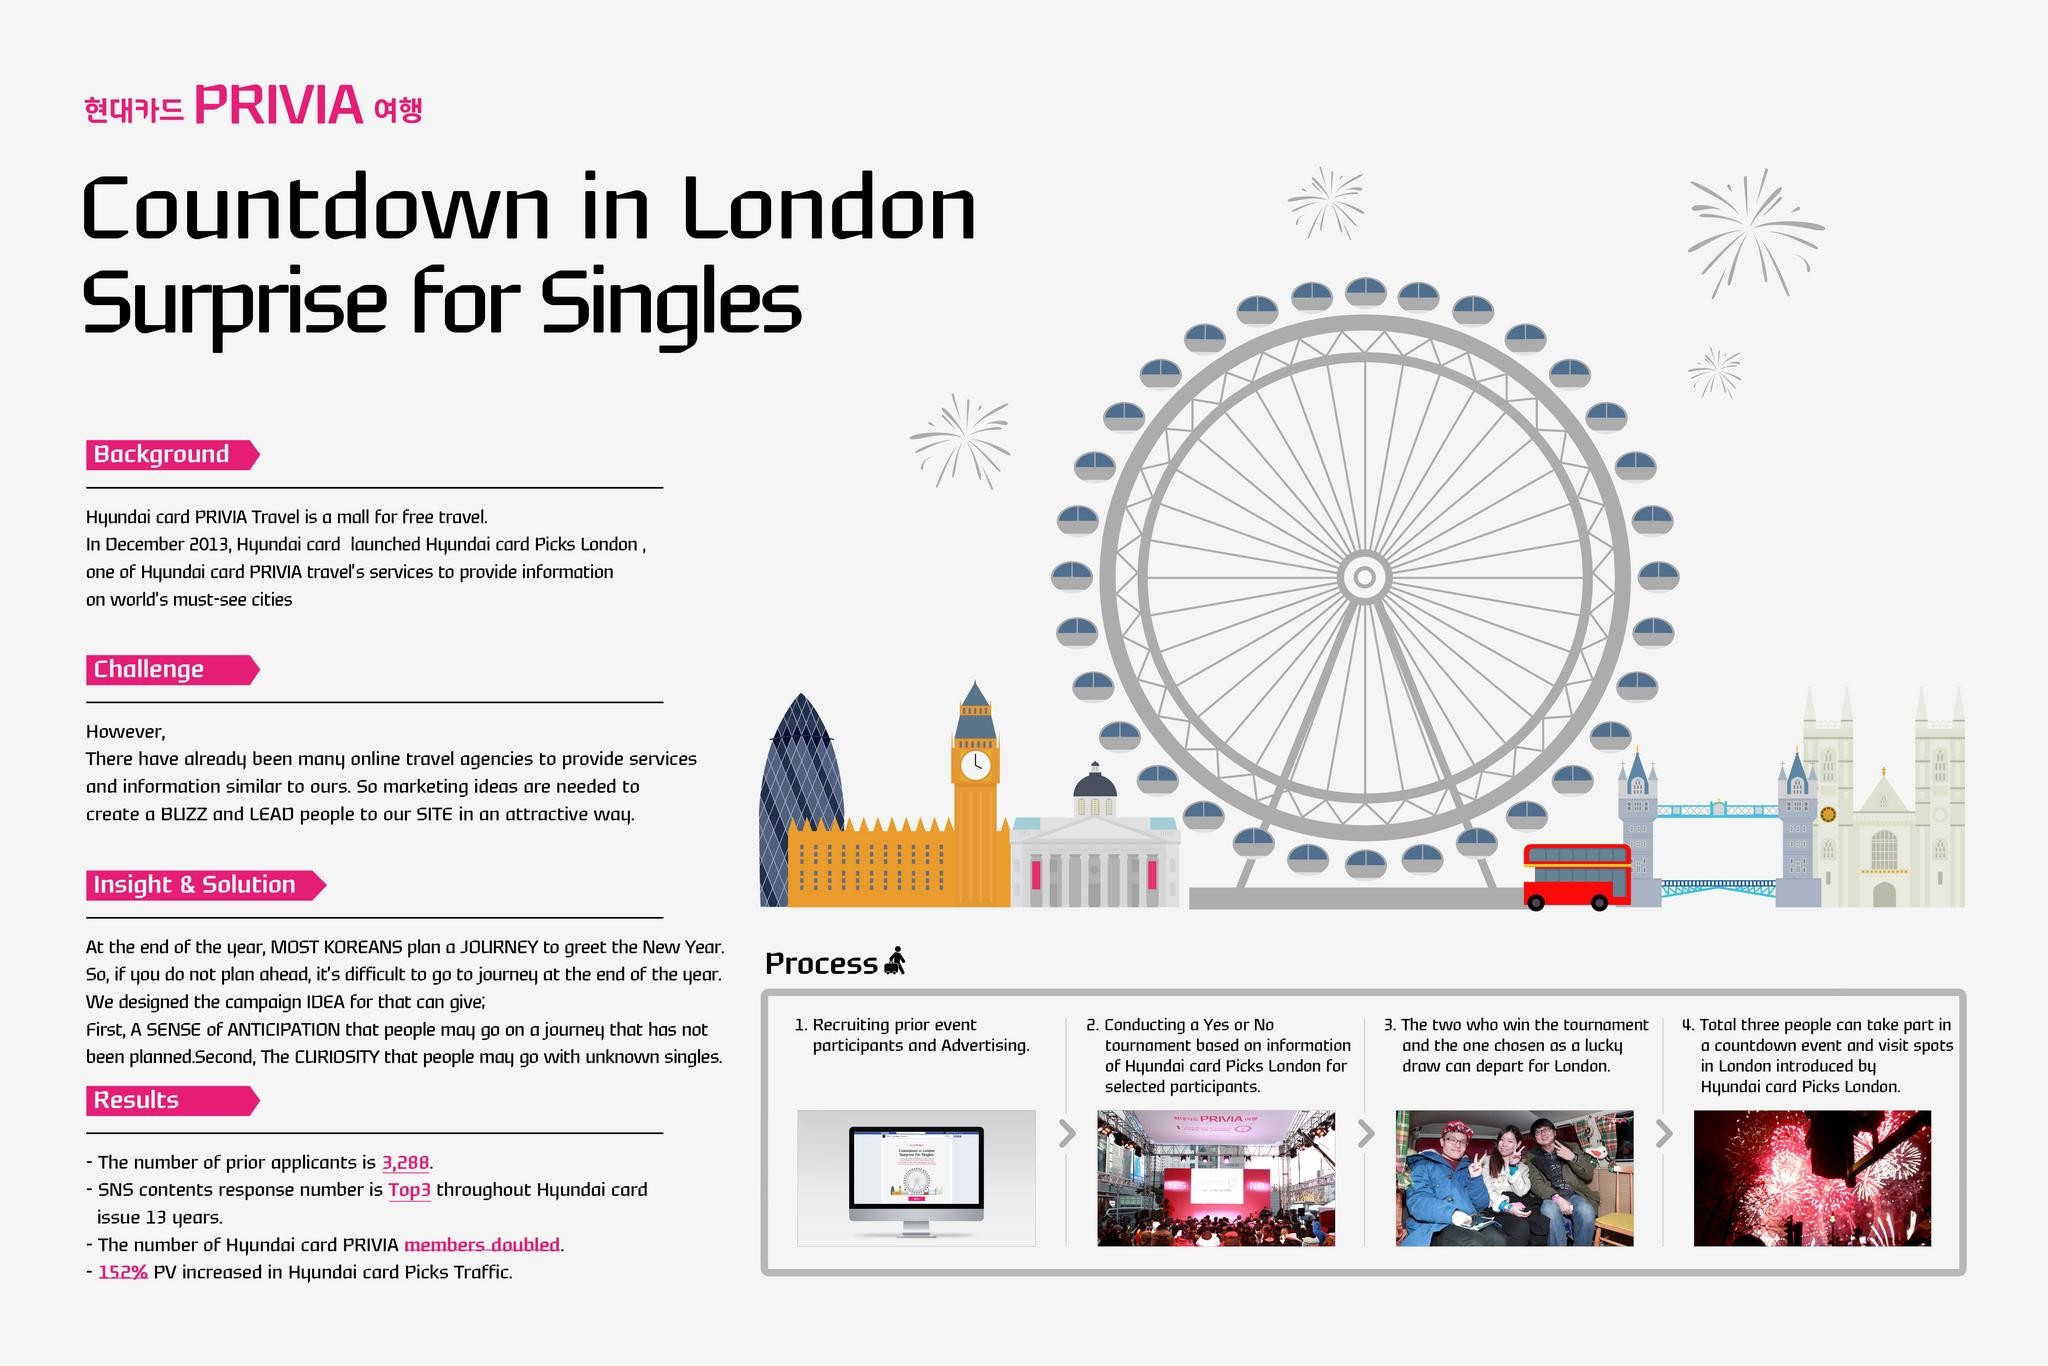 COUNTDOWN IN LONDON SURPRISE FOR SINGLES